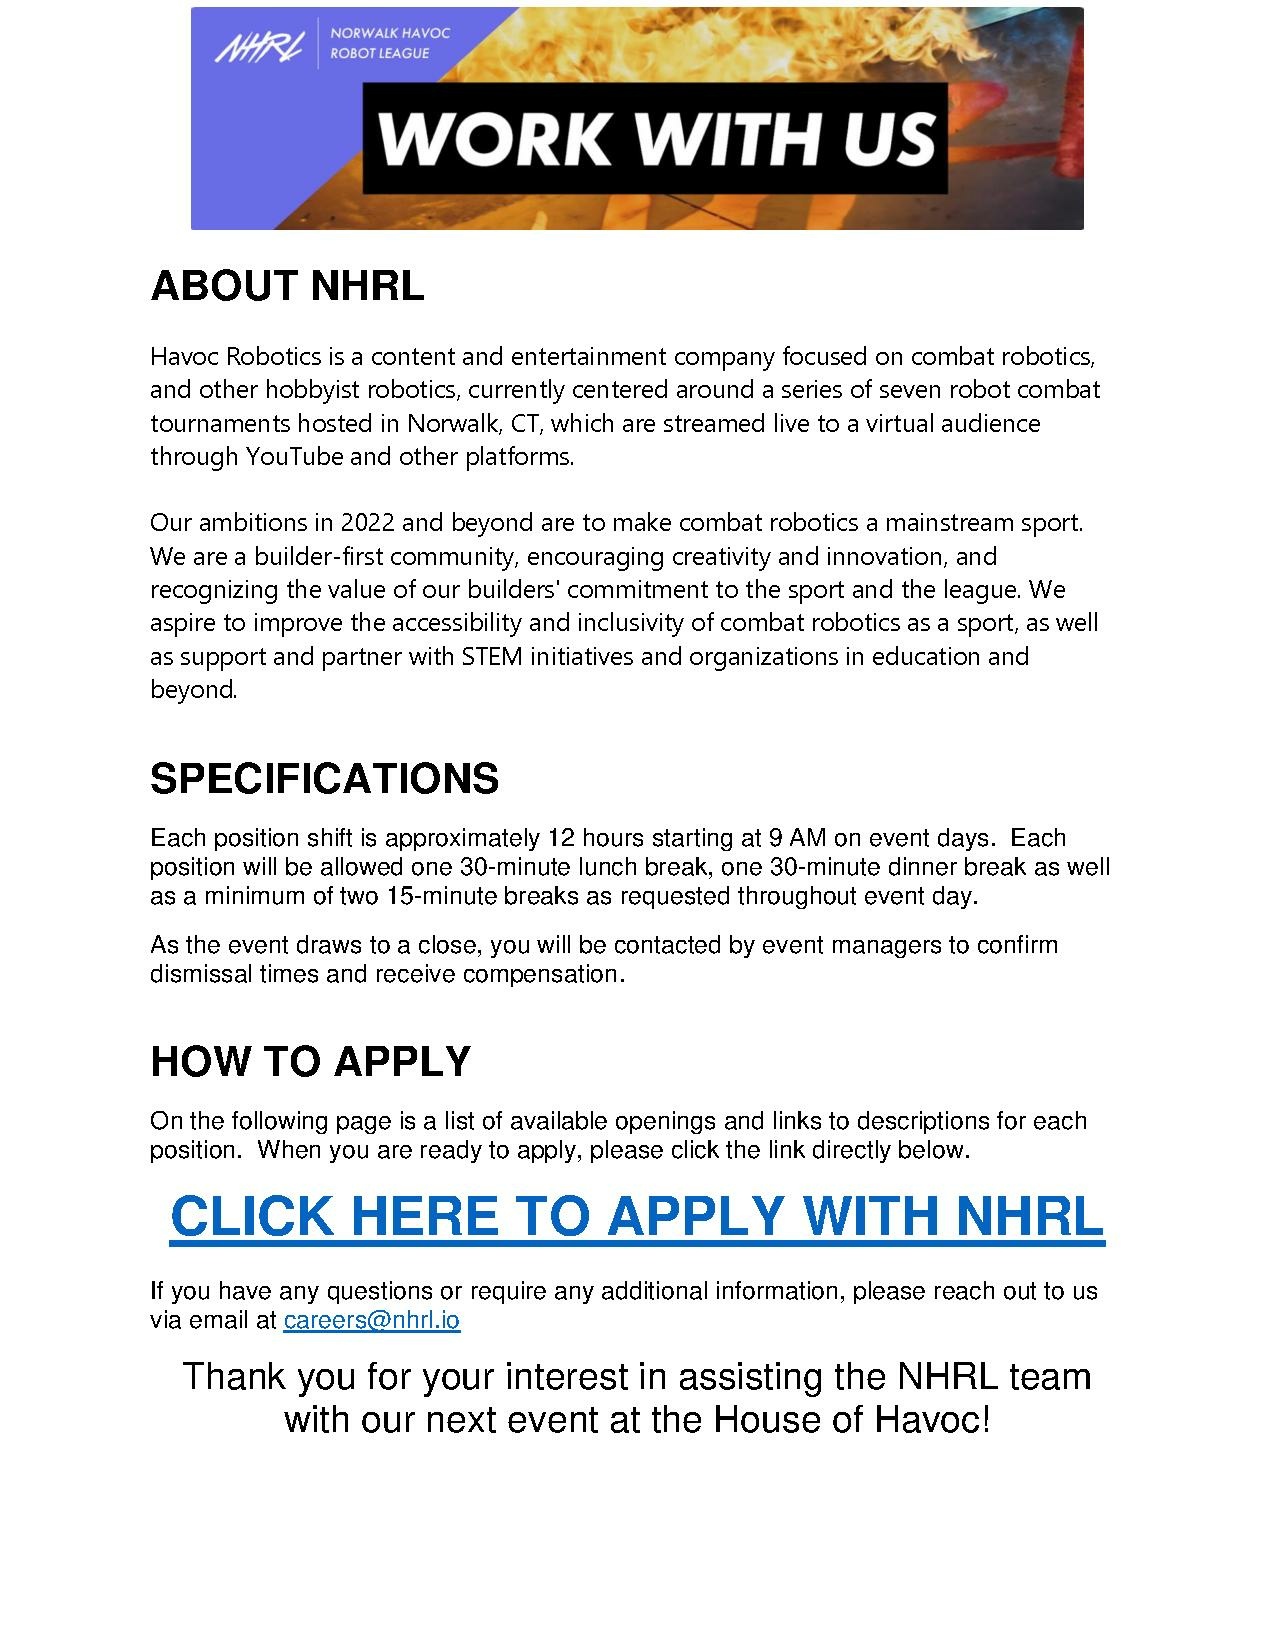 Here is more information about the jobs at NHRL.